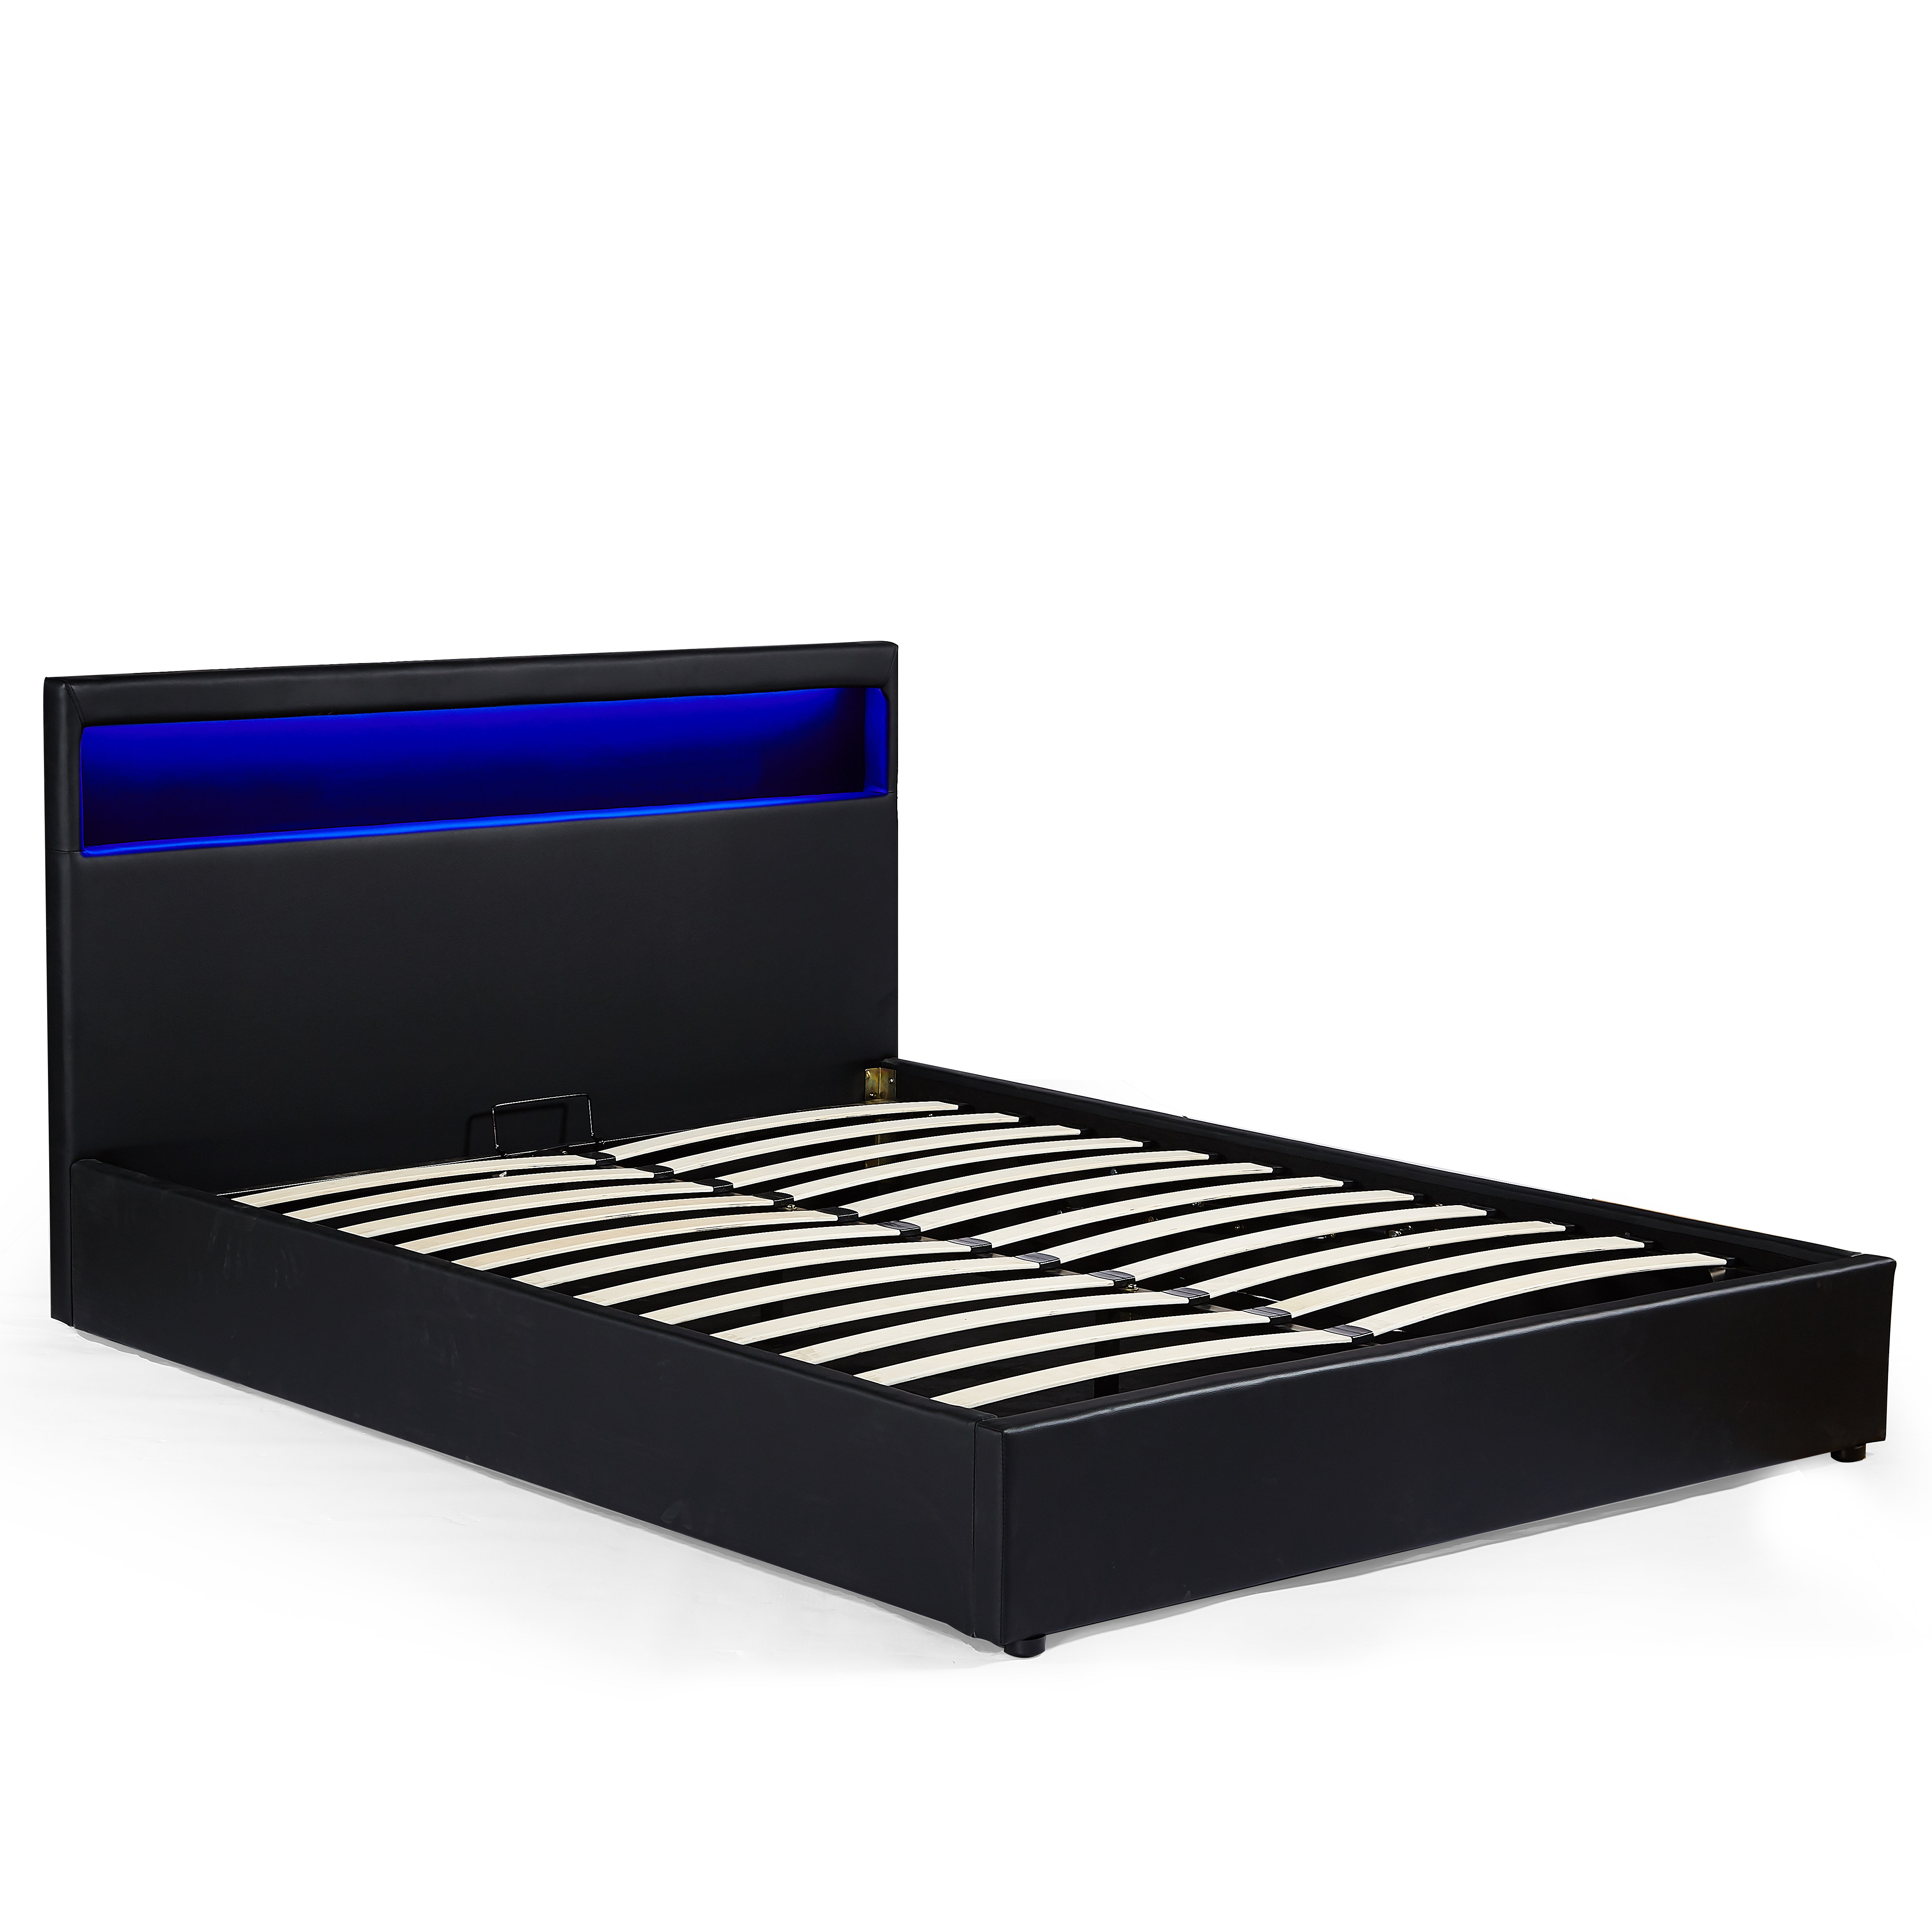 Leather bed frame with Storage